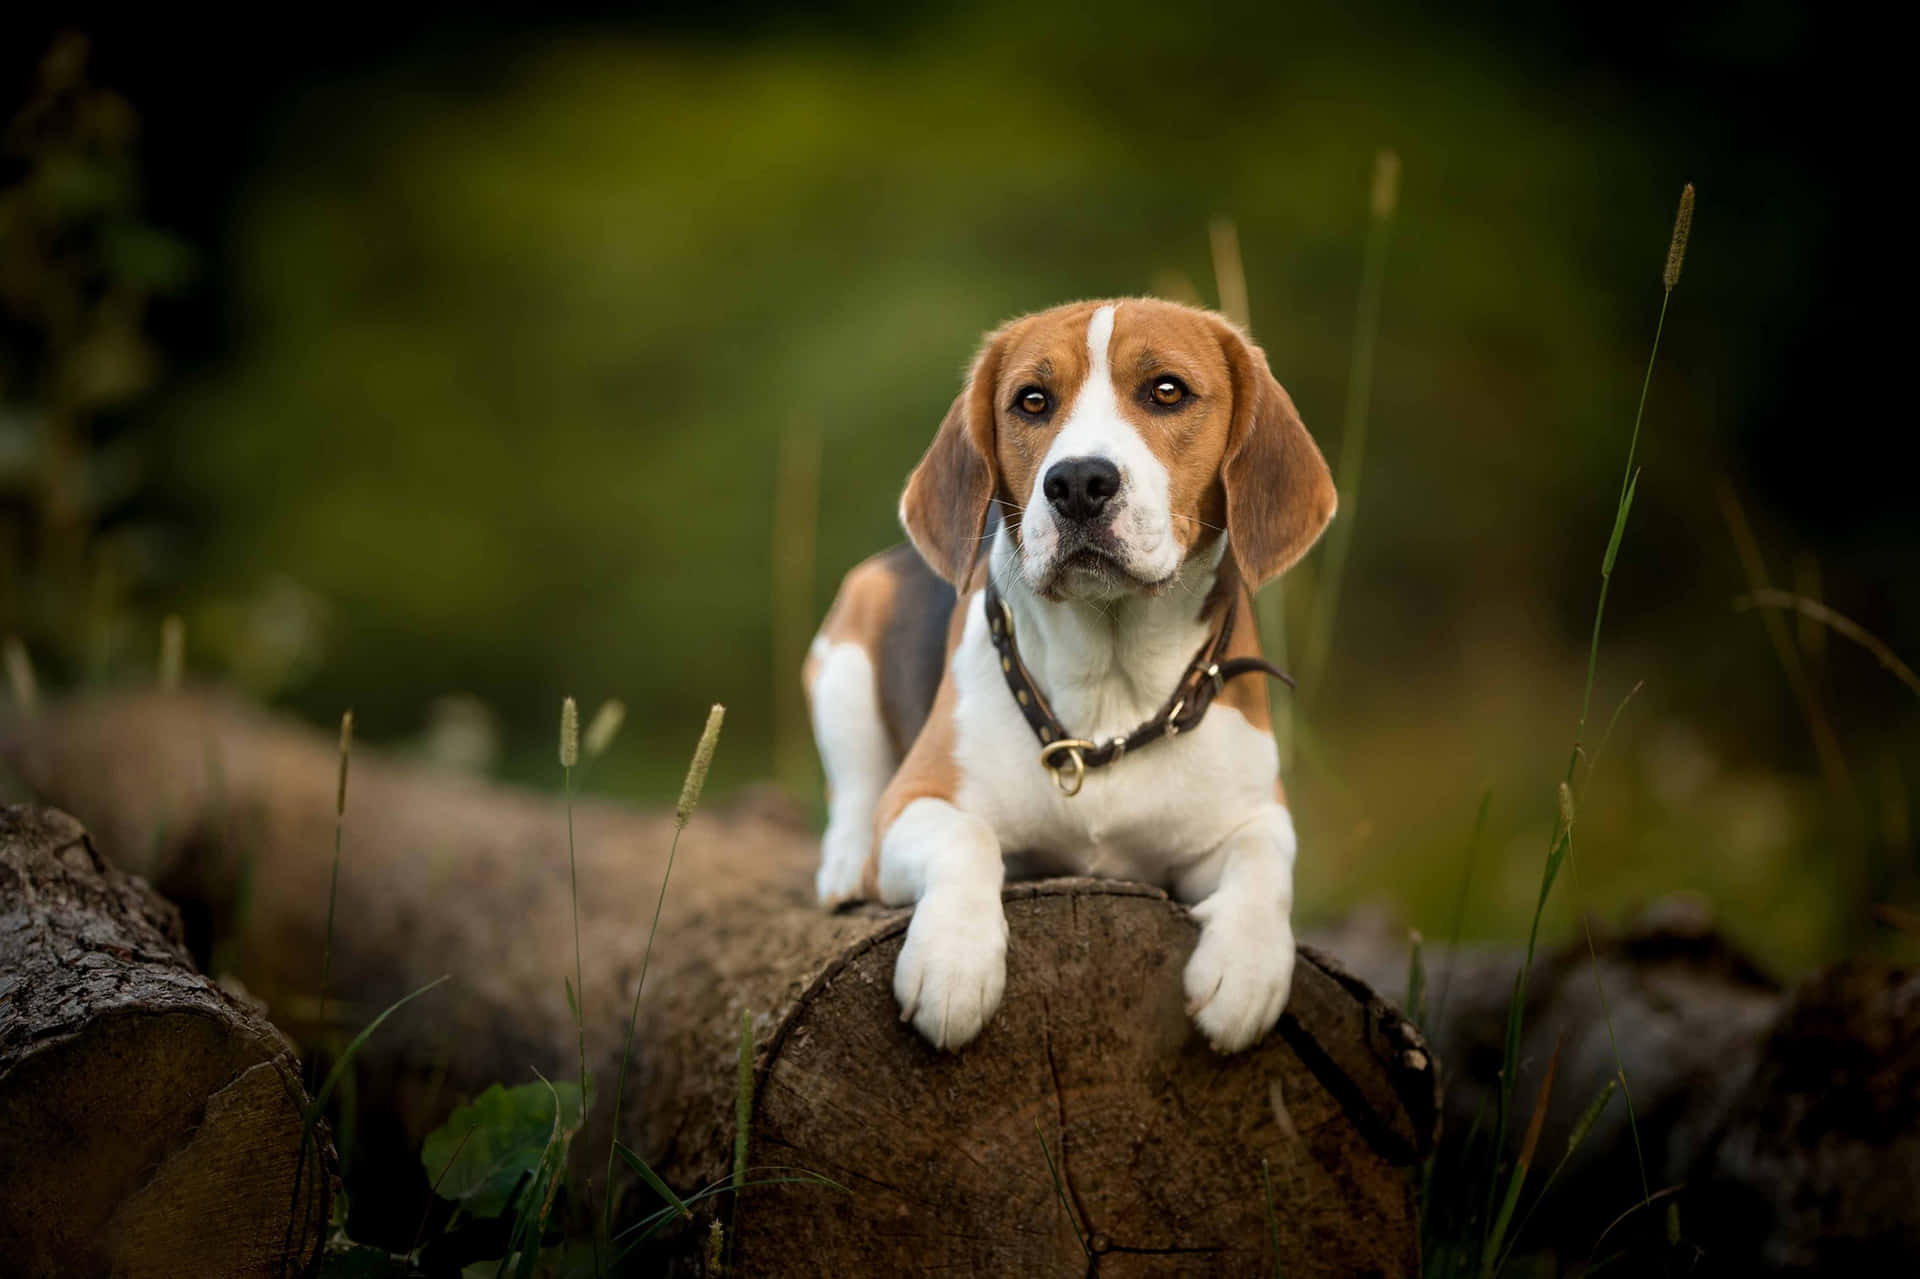 Adorable Beagle Puppy with Endearing Expression